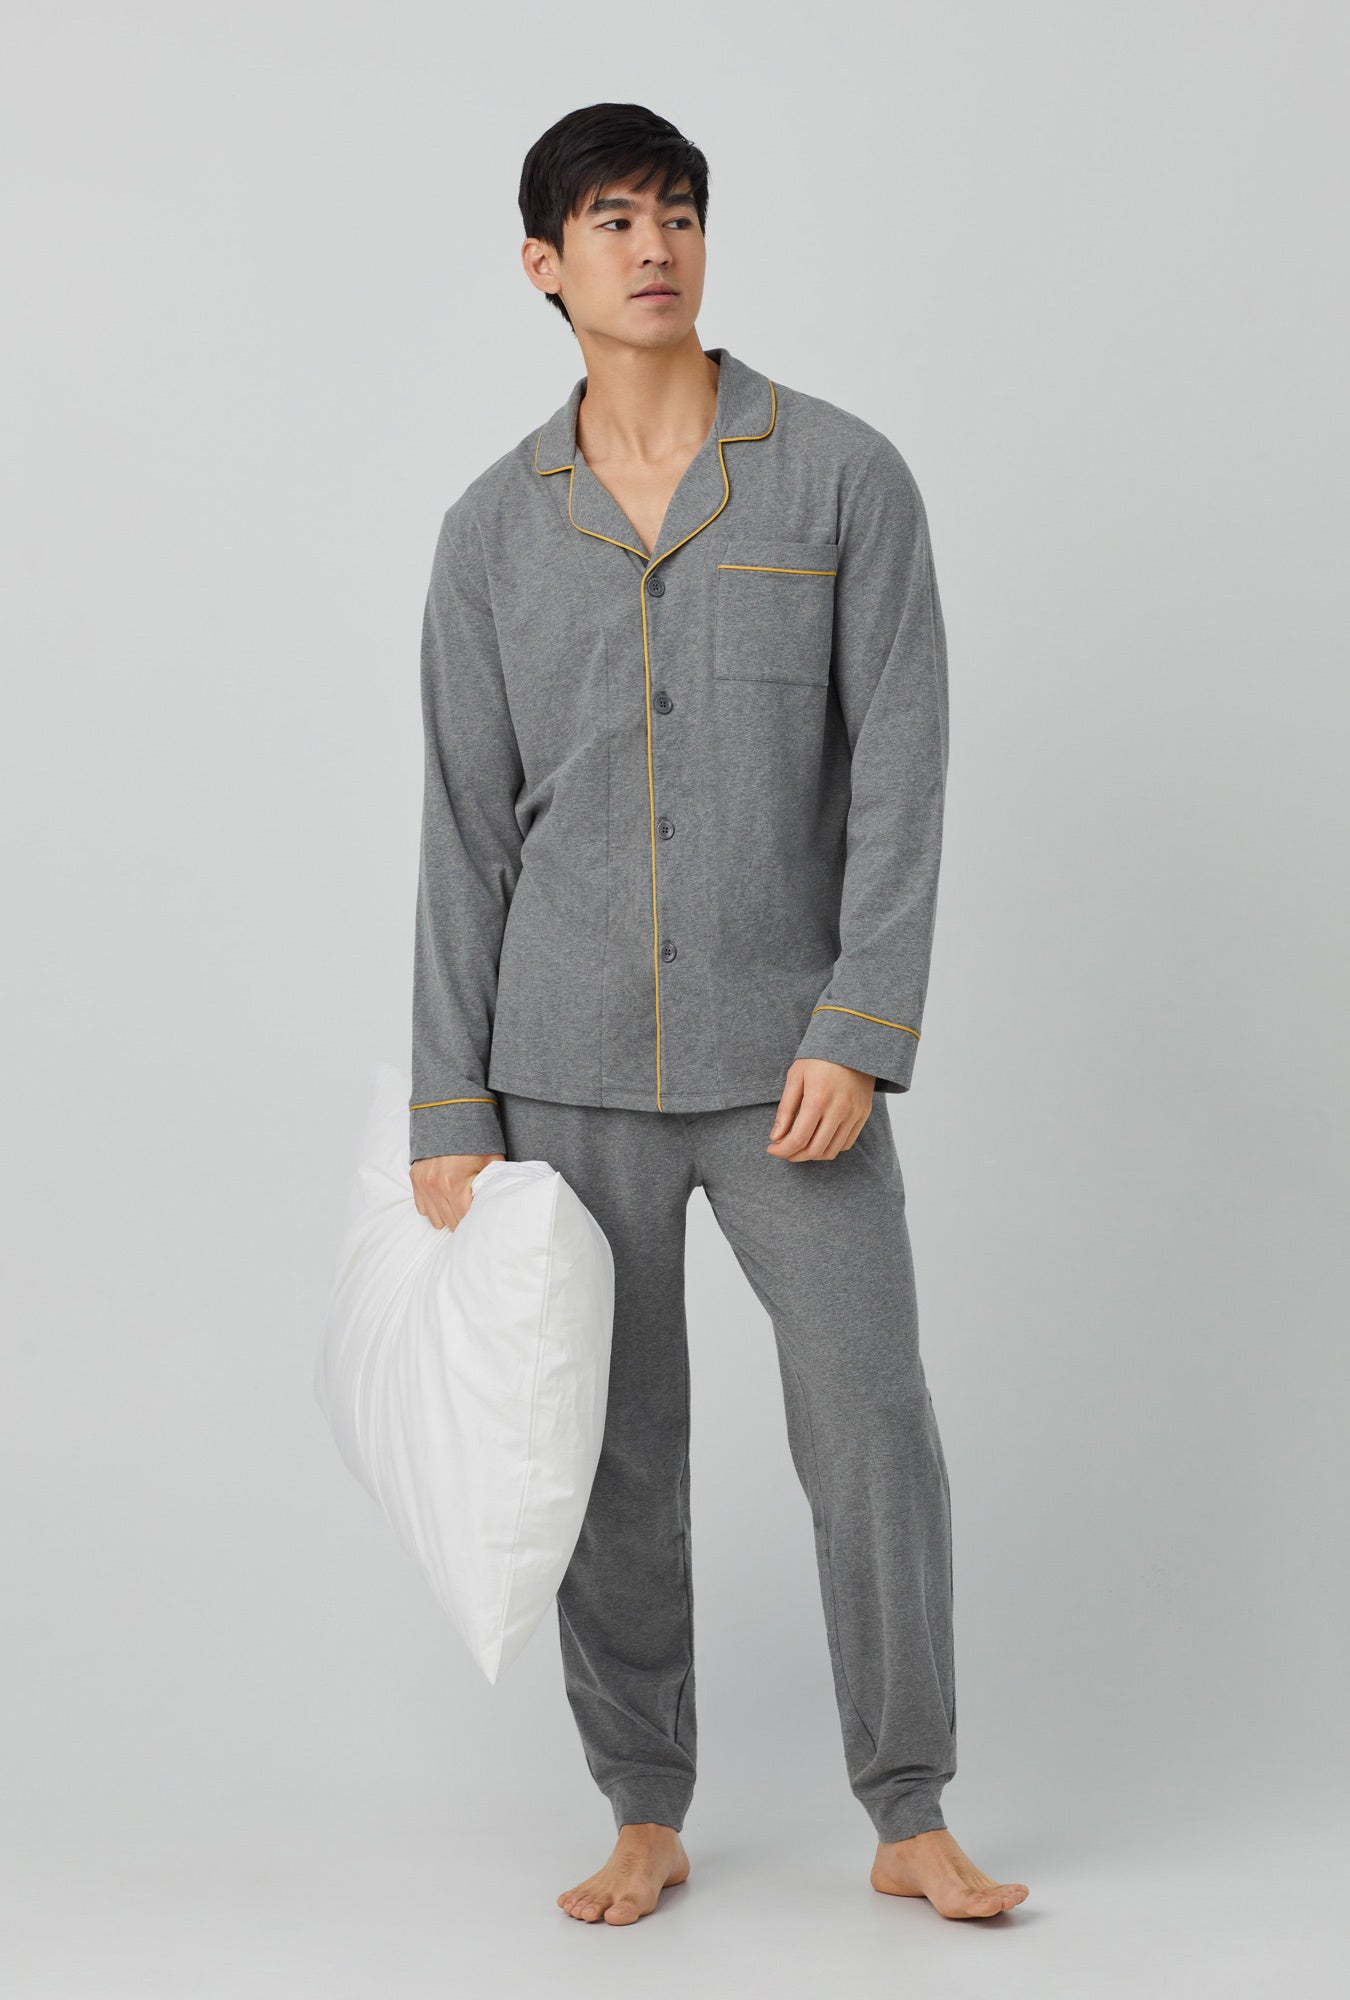 A men wearing grey  Long Sleeve and Jogger Stretch Jersey PJ Set with Charcoal Heather print